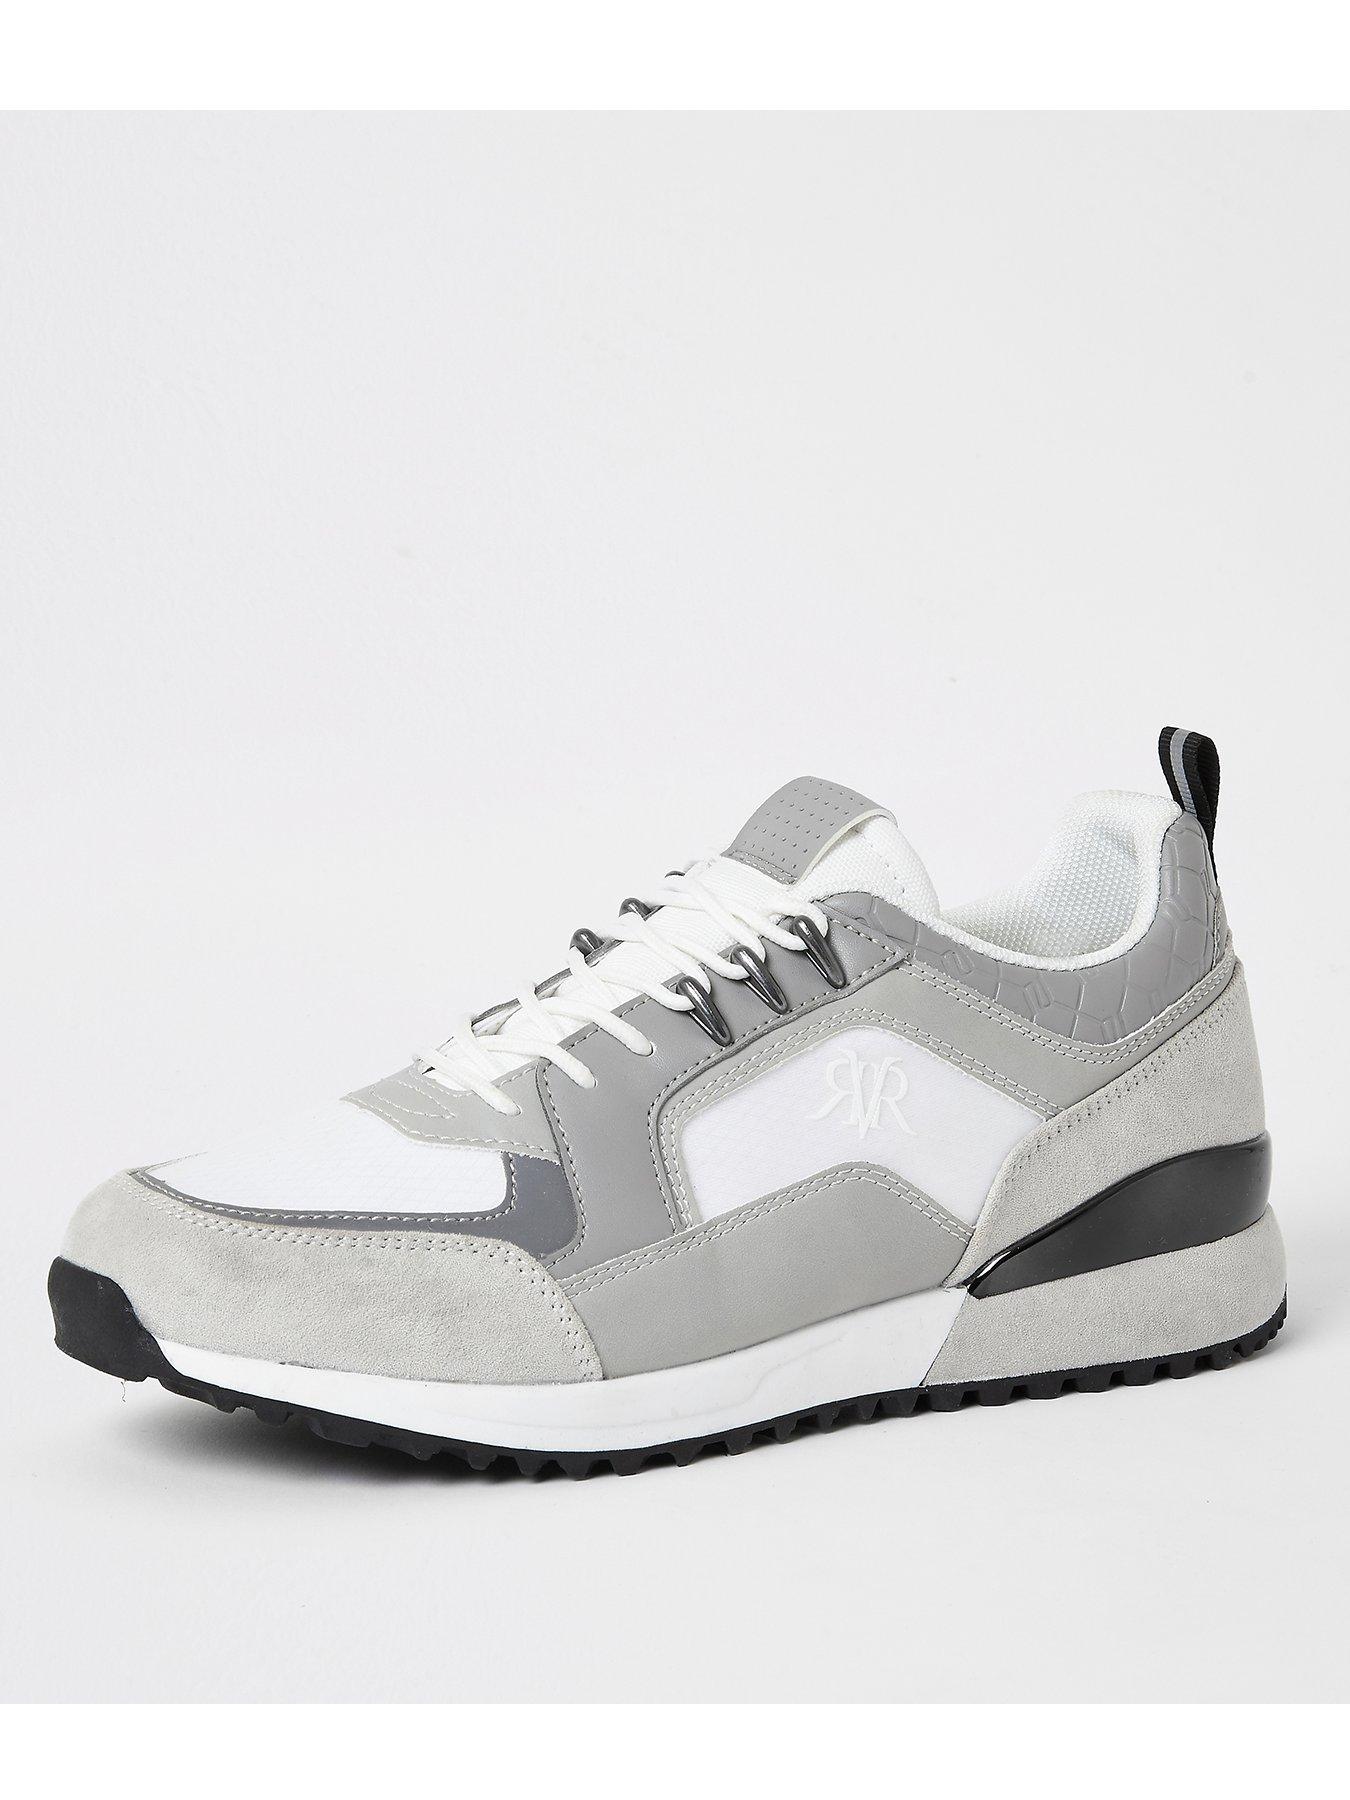 river island mens trainers